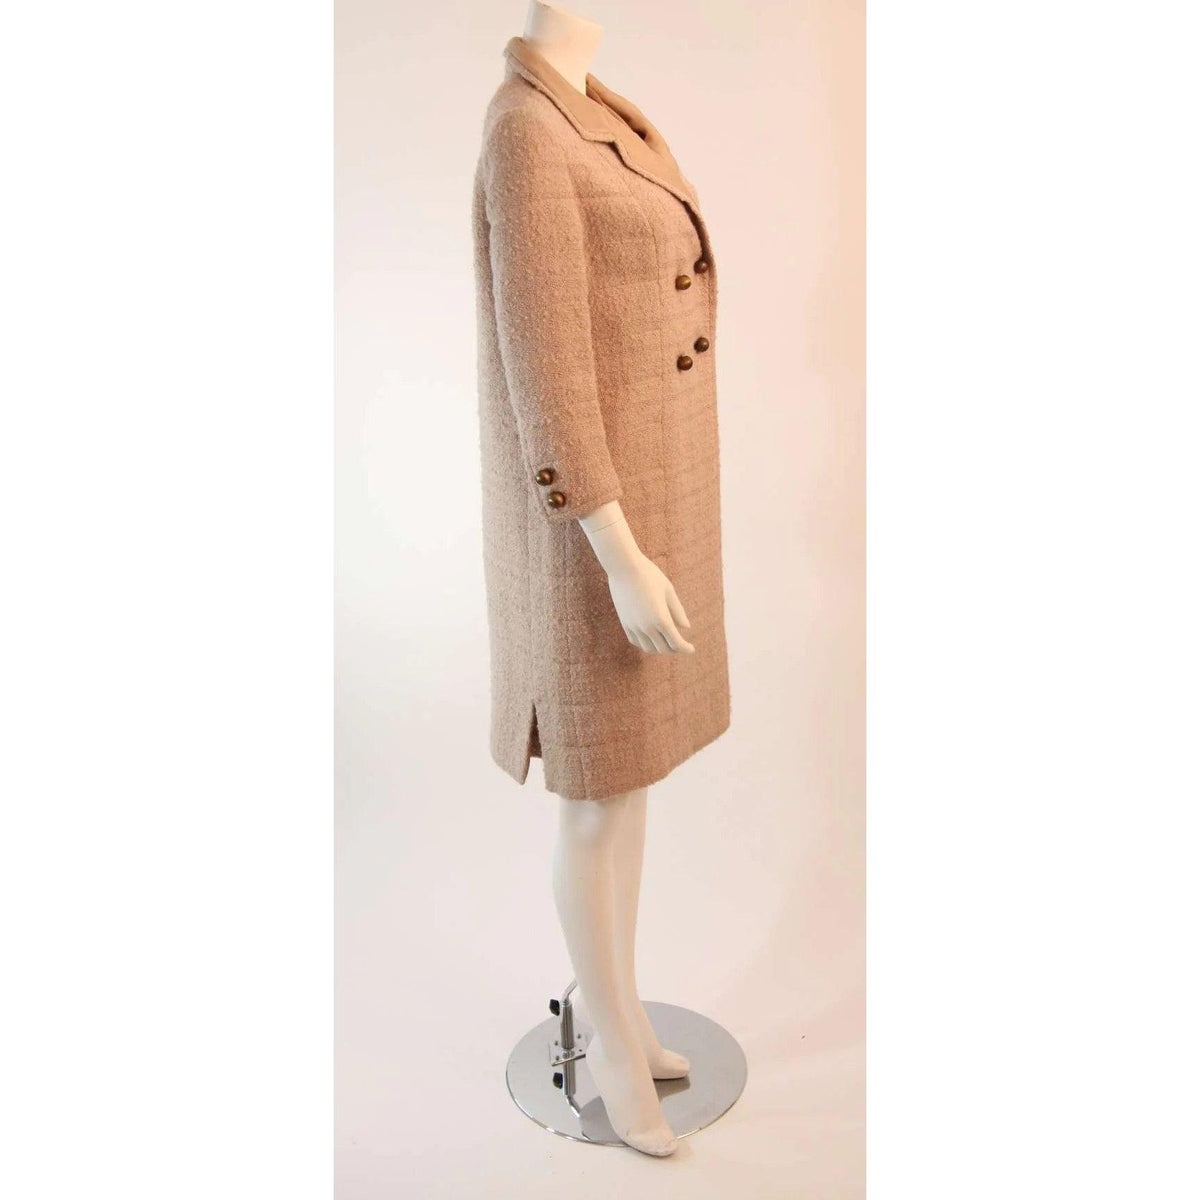 Chanel 1960s Attributed to Chanel Cream Boucle 3 PC Tweed Suit | Size 37